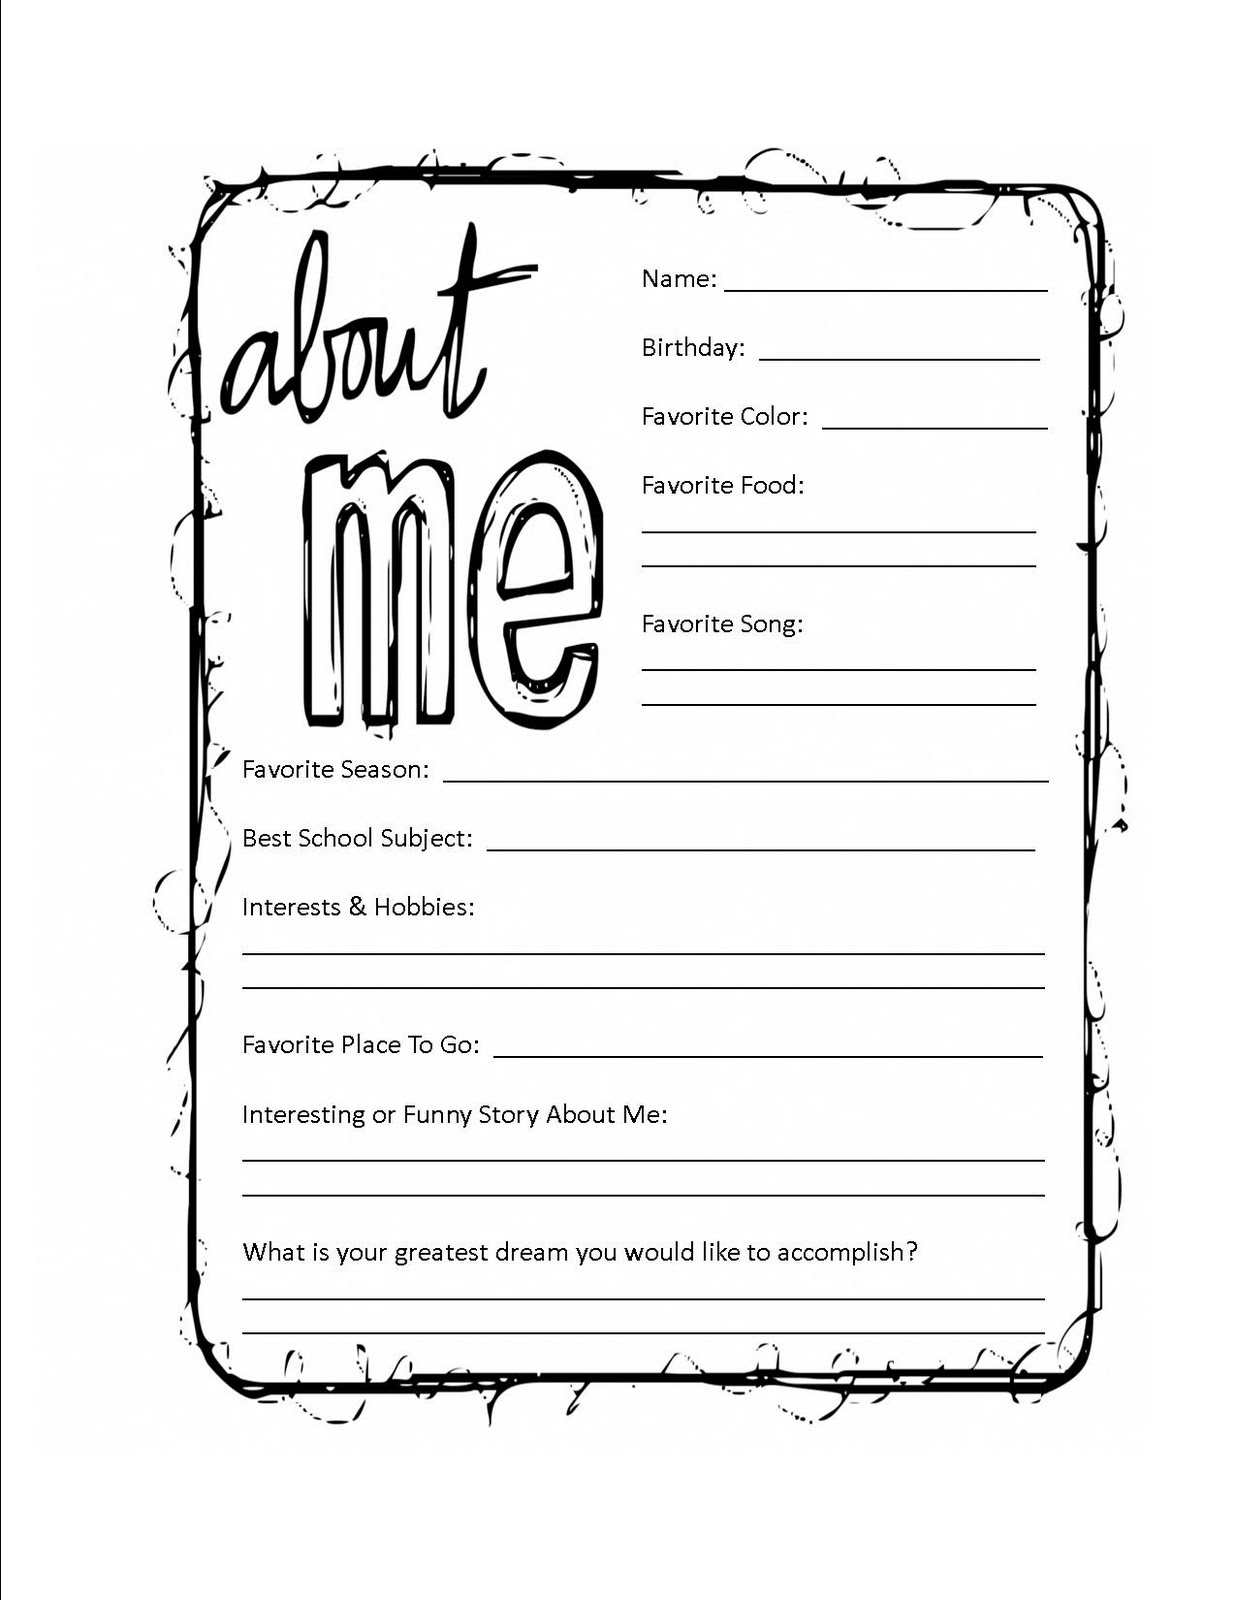 All About Me Sheets Image